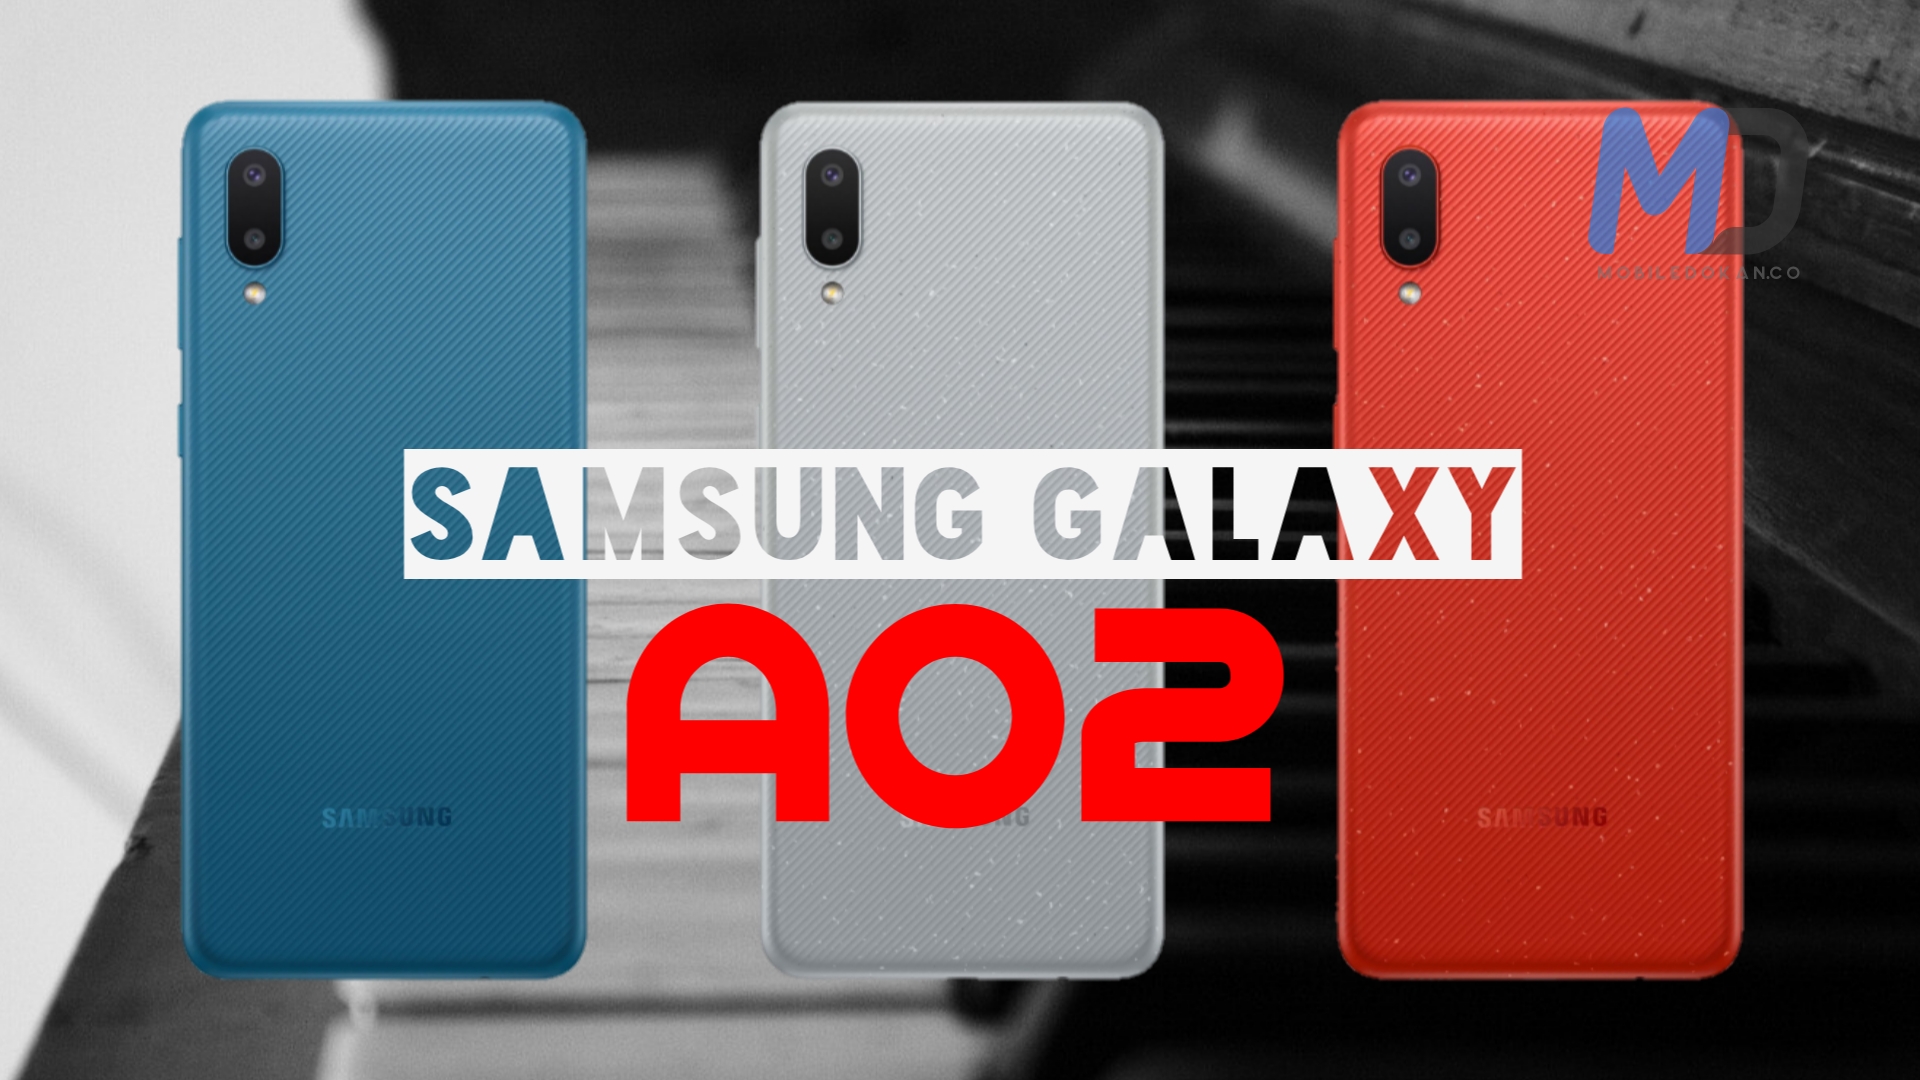 Samsung Galaxy A02 just received the Android 11 update